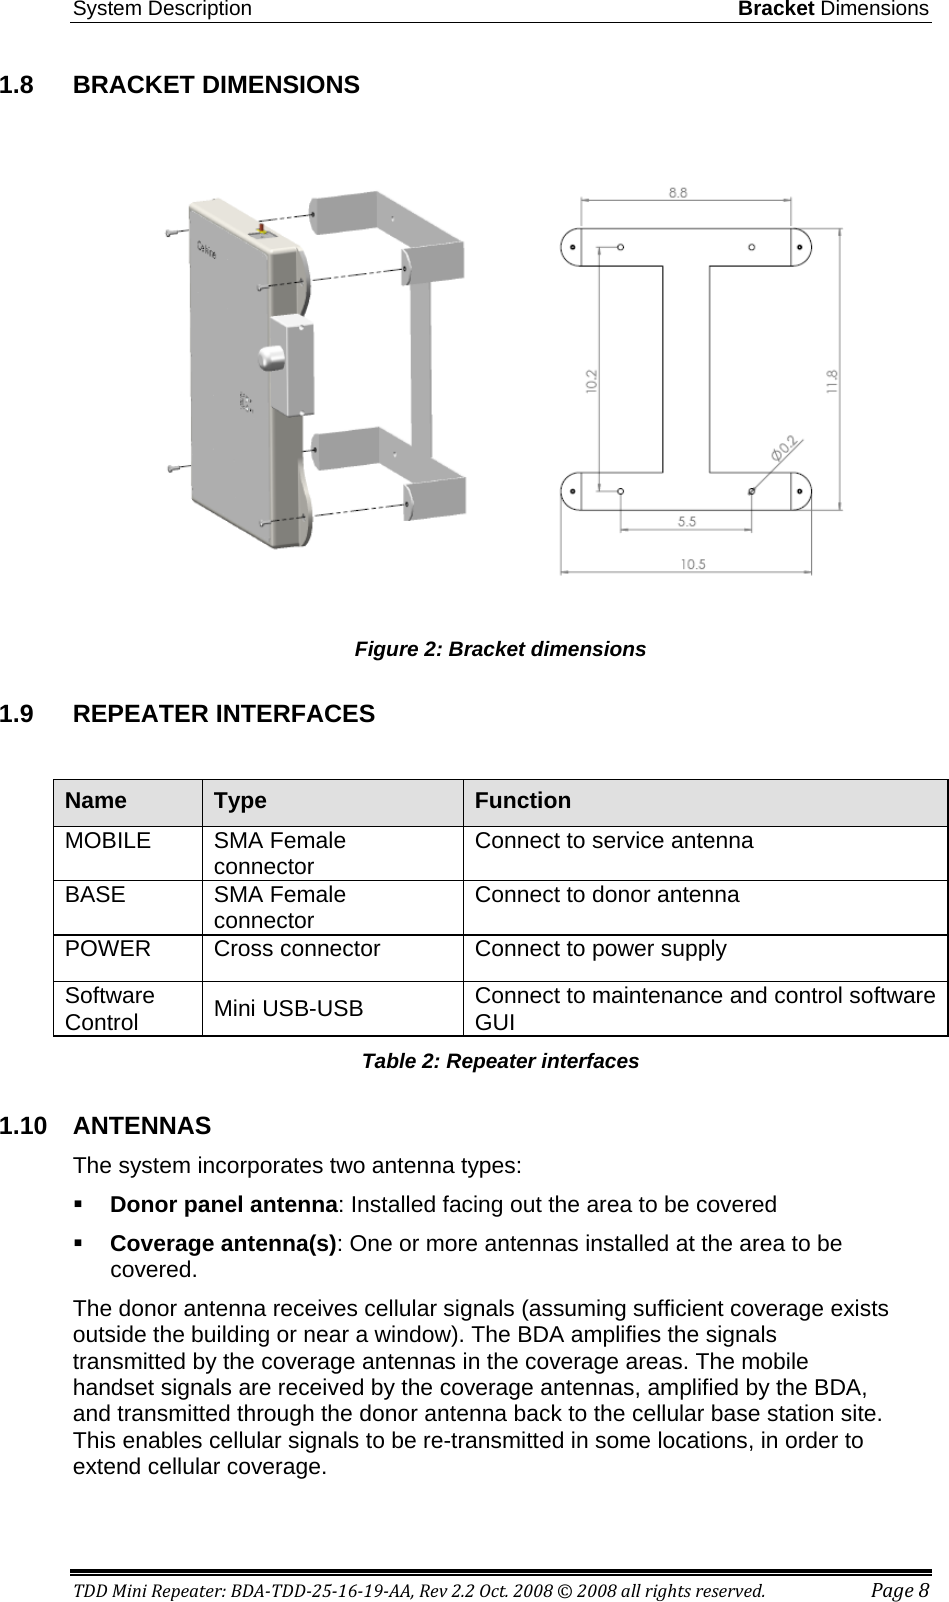 System Description Bracket Dimensions TDD Mini Repeater: BDA-TDD-25-16-19-AA, Rev 2.2 Oct. 2008 © 2008 all rights reserved. Page 8 1.8  BRACKET DIMENSIONS  Figure 2: Bracket dimensions 1.9  REPEATER INTERFACES  Name Type Function MOBILE SMA Female connector Connect to service antenna  BASE  SMA Female connector Connect to donor antenna  POWER Cross connector  Connect to power supply      Software Control  Mini USB-USB Connect to maintenance and control software GUI  Table 2: Repeater interfaces 1.10 ANTENNAS  The system incorporates two antenna types:  Donor panel antenna: Installed facing out the area to be covered   Coverage antenna(s): One or more antennas installed at the area to be covered.  The donor antenna receives cellular signals (assuming sufficient coverage exists outside the building or near a window). The BDA amplifies the signals transmitted by the coverage antennas in the coverage areas. The mobile handset signals are received by the coverage antennas, amplified by the BDA, and transmitted through the donor antenna back to the cellular base station site. This enables cellular signals to be re-transmitted in some locations, in order to extend cellular coverage. 